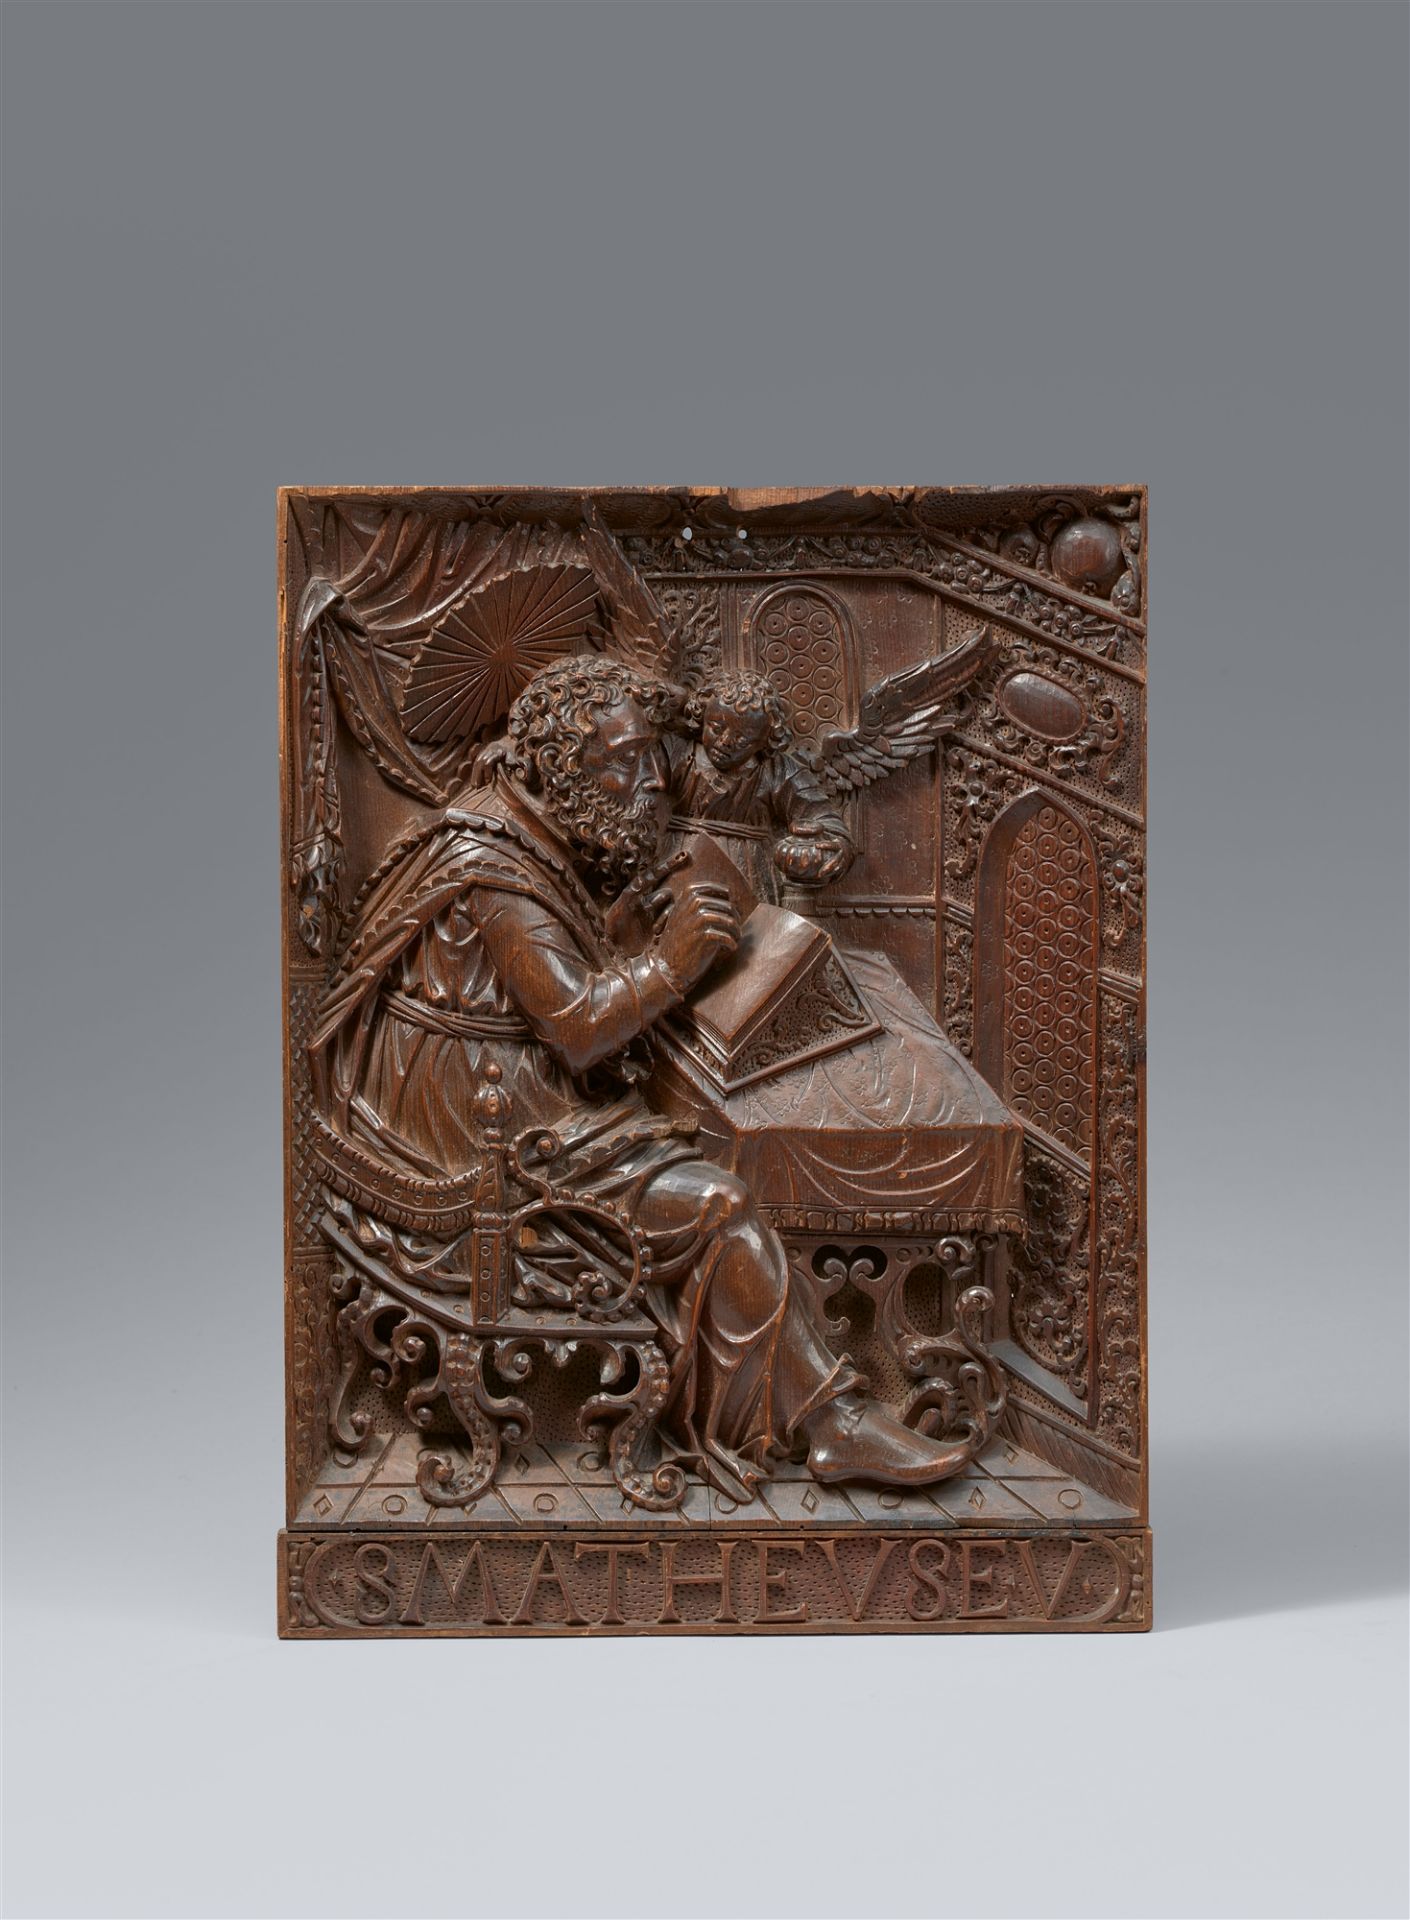 A carved wood relief of St Matthew, Bavaria, 1st quarter 17th century - Image 2 of 2